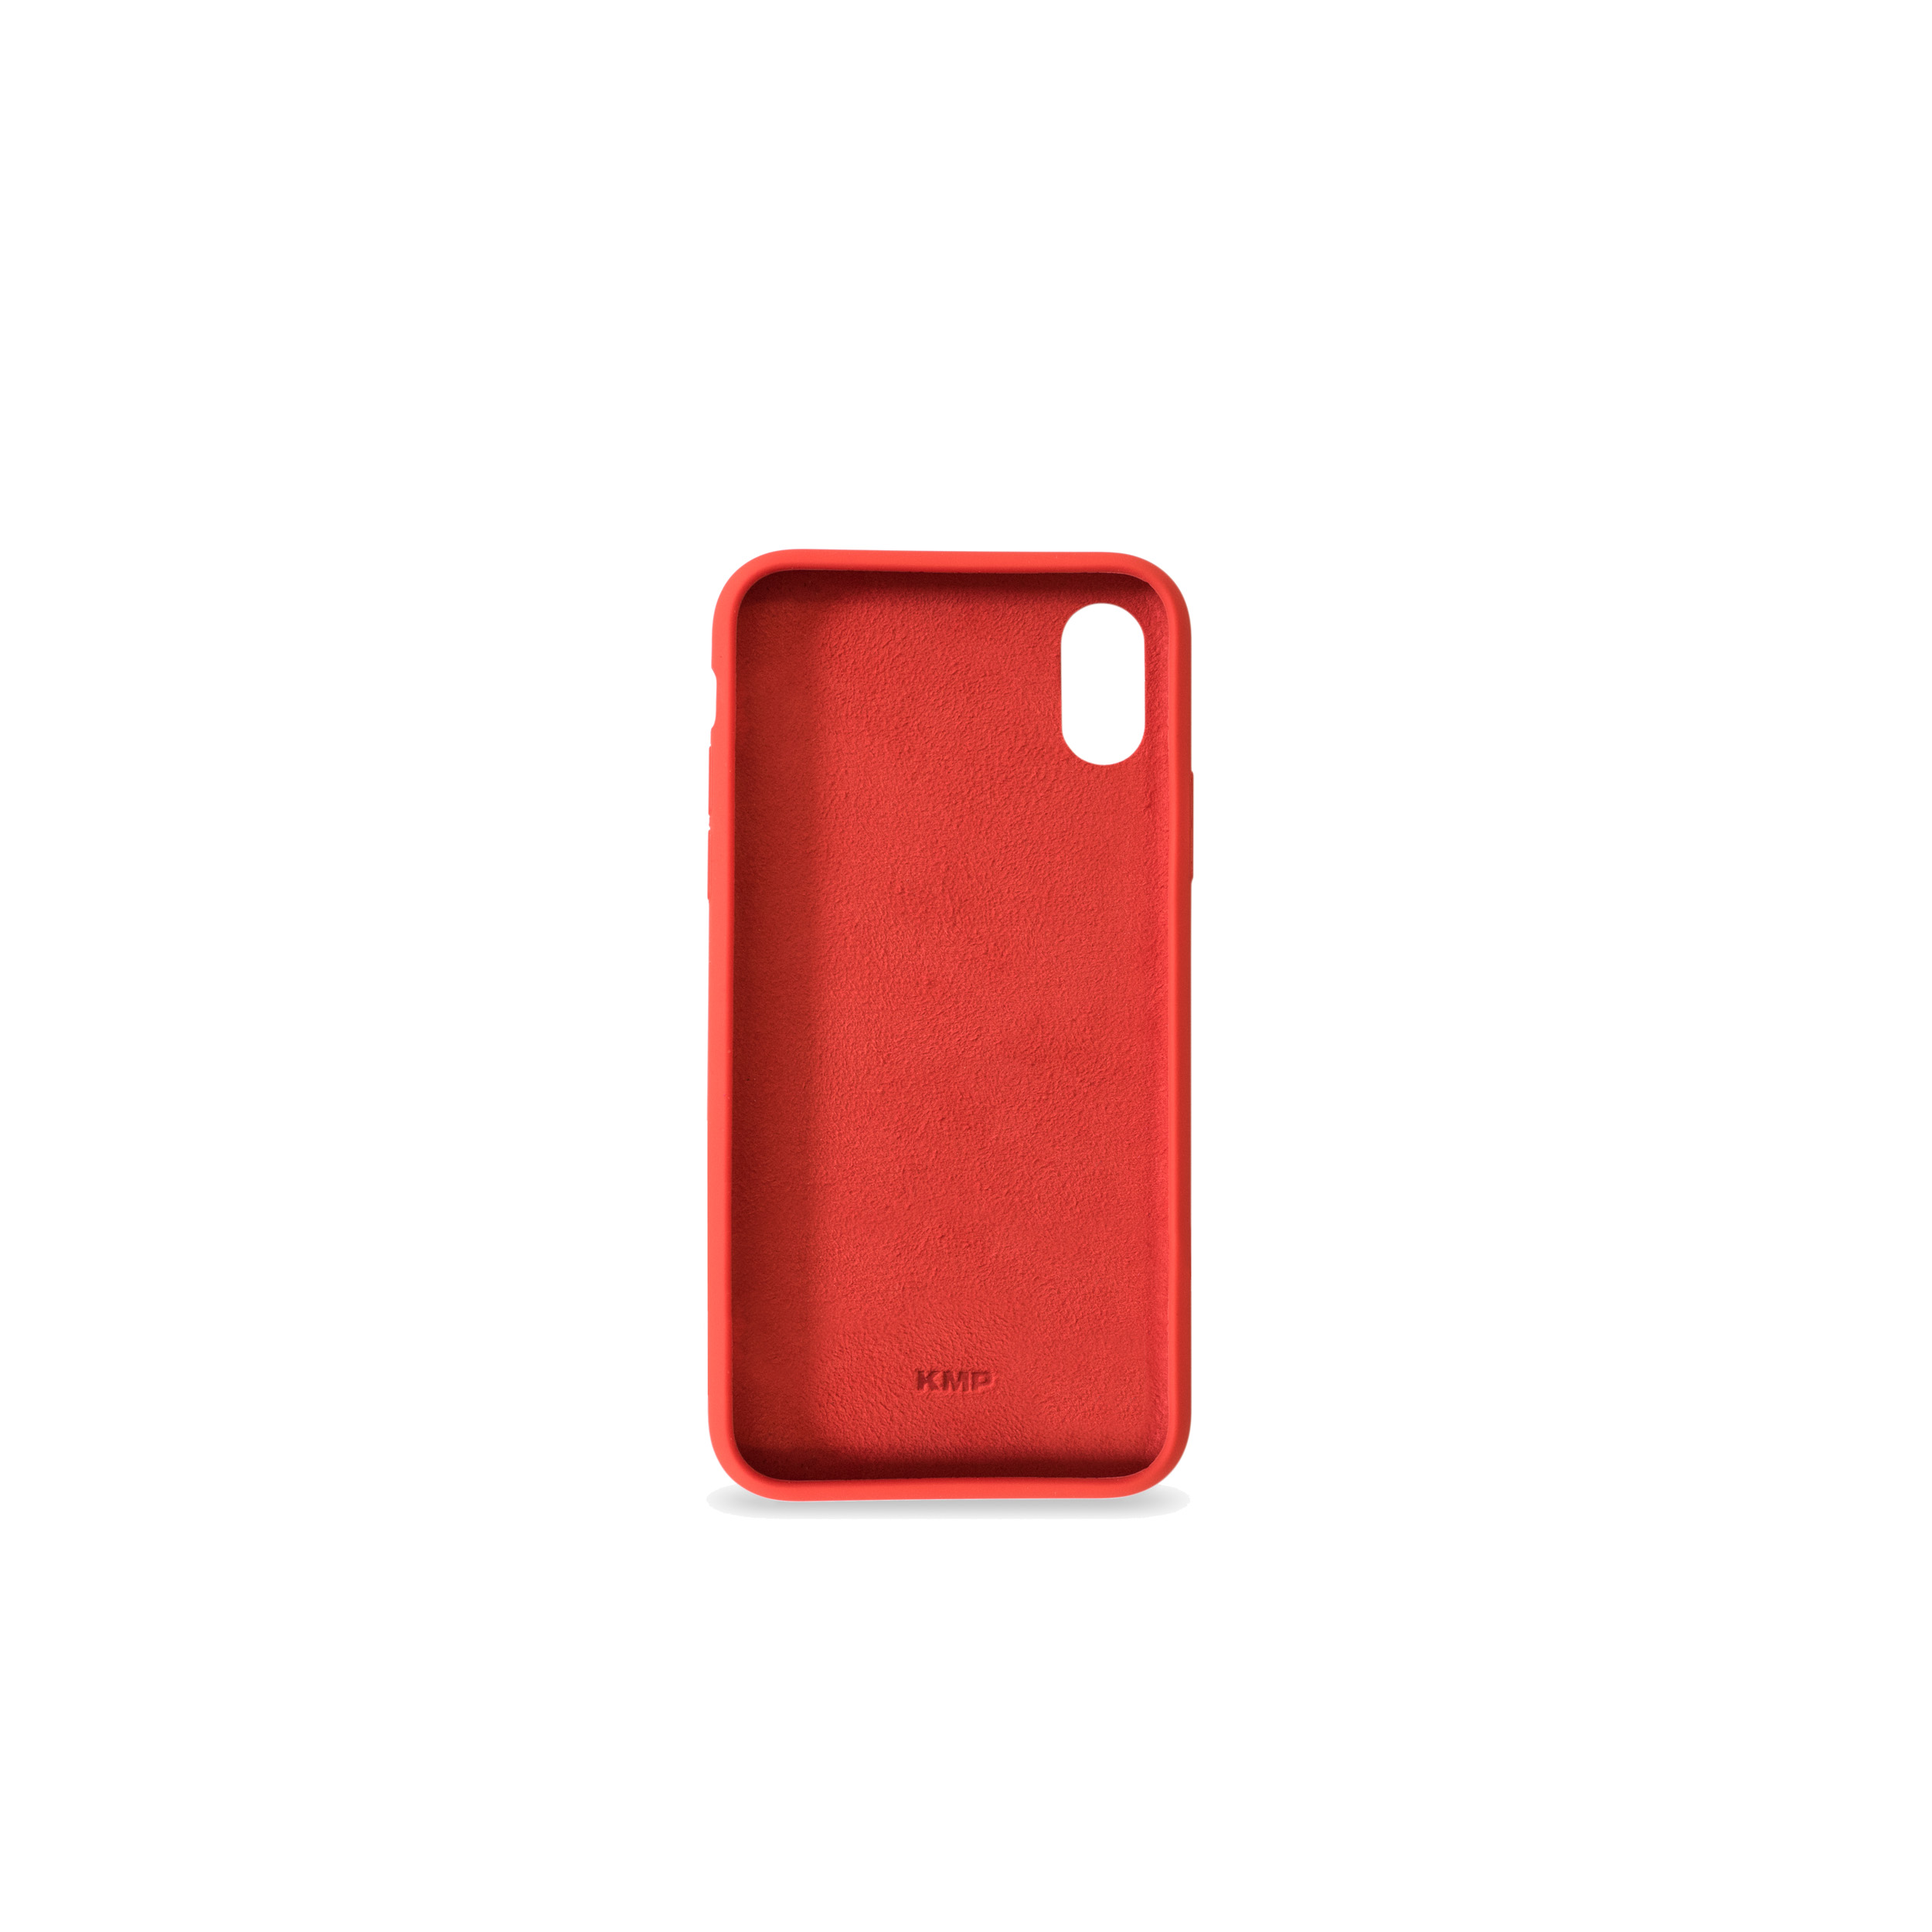 KMP für Schutzhülle XS red Max Silikon Max, Red, iPhone Cover, XS iPhone Apple, Full